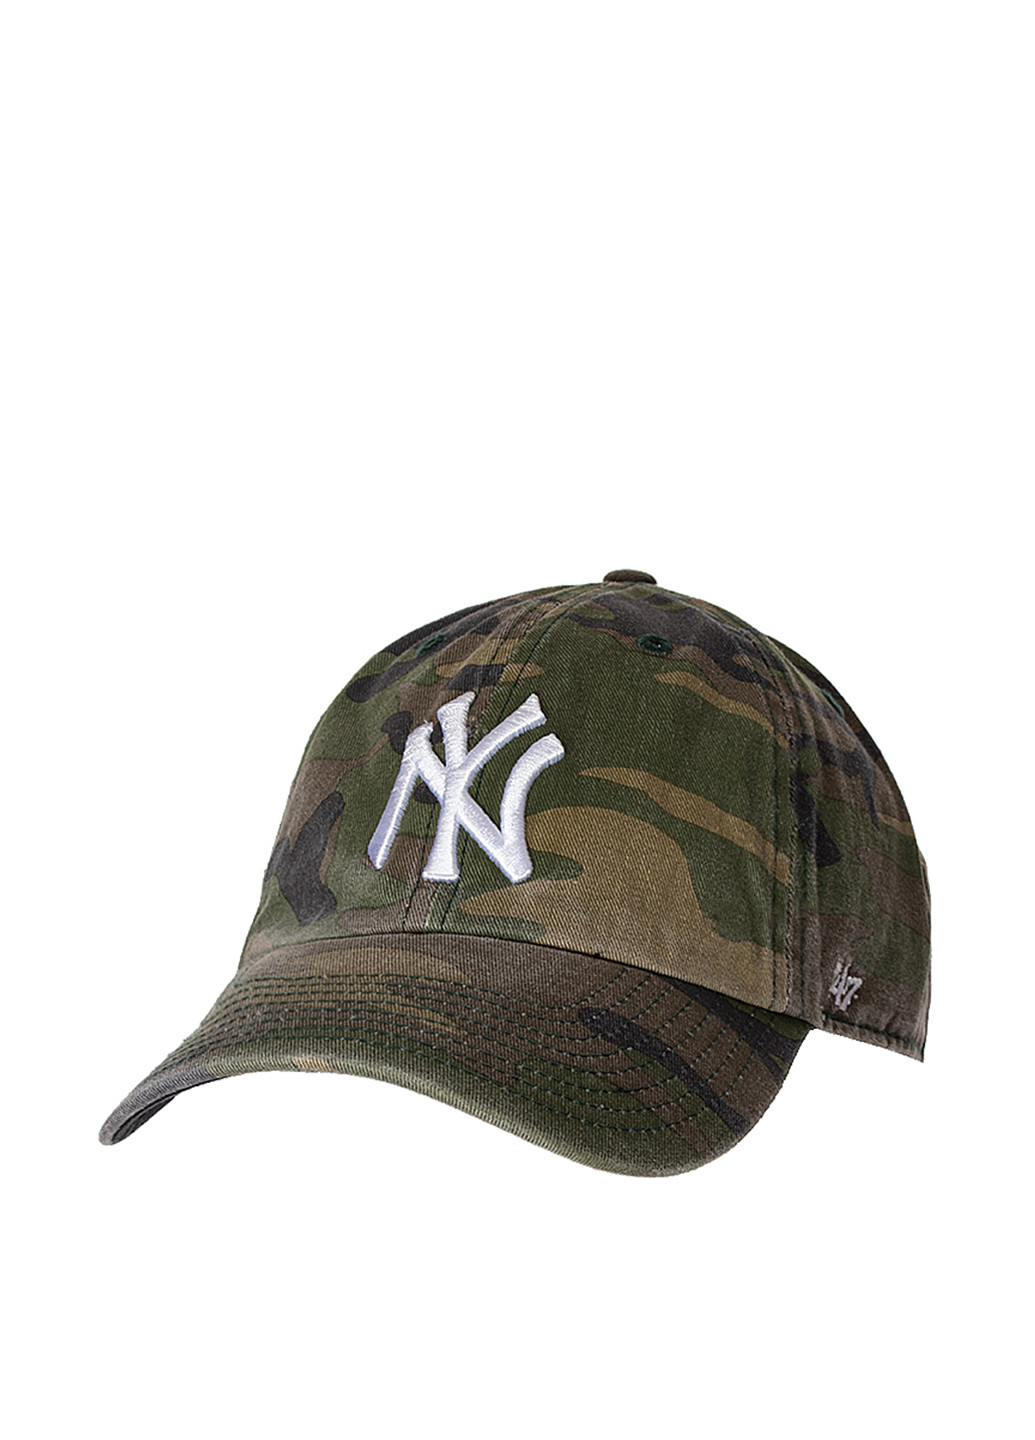 Кепка 47 47 brand clean up new york yankees (223732842)